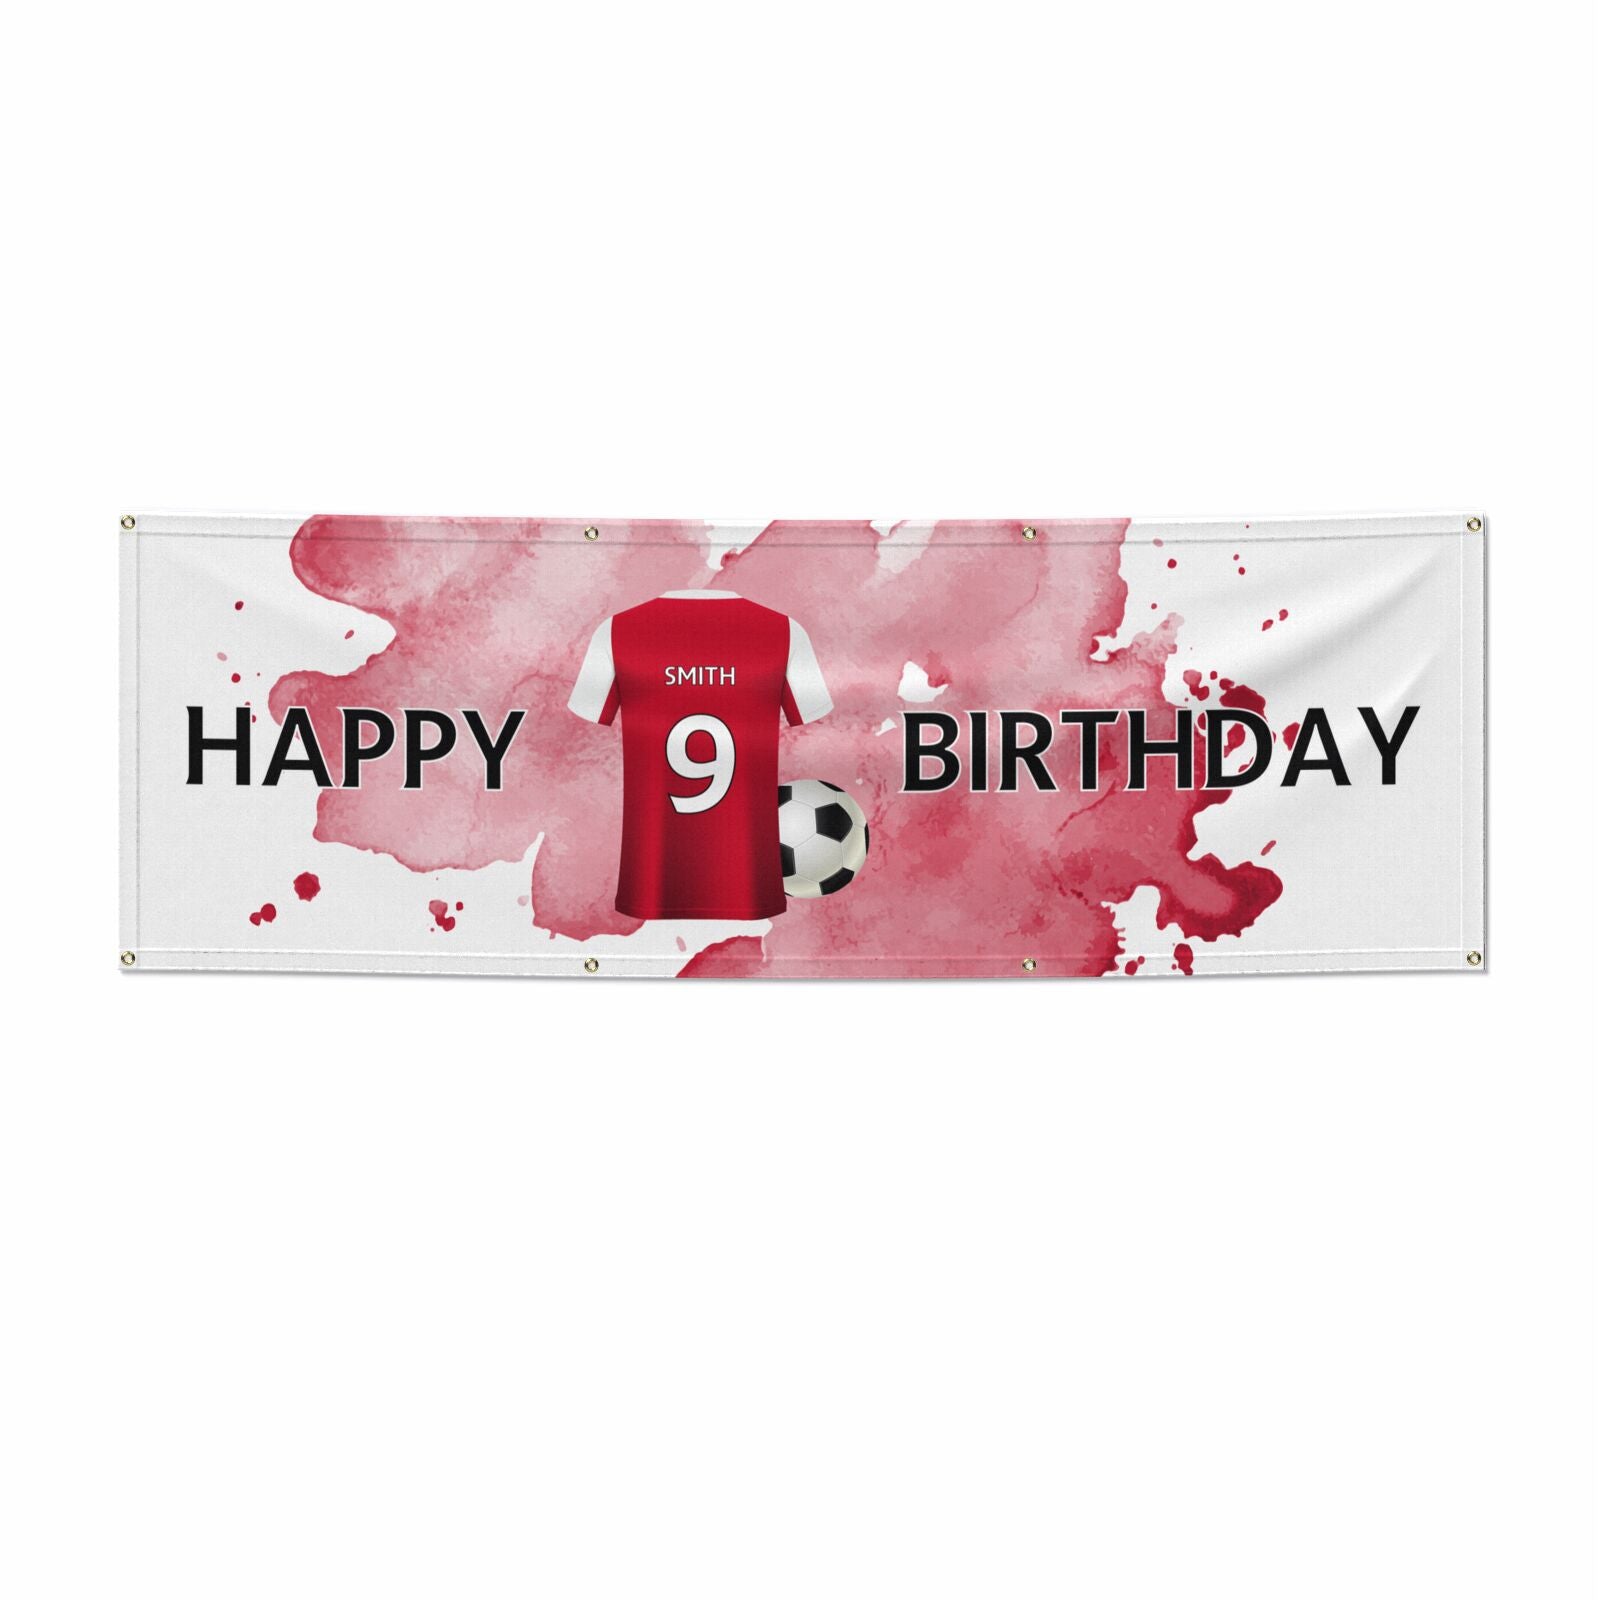 Red White Personalised Football Shirt 6x2 Vinly Banner with Grommets